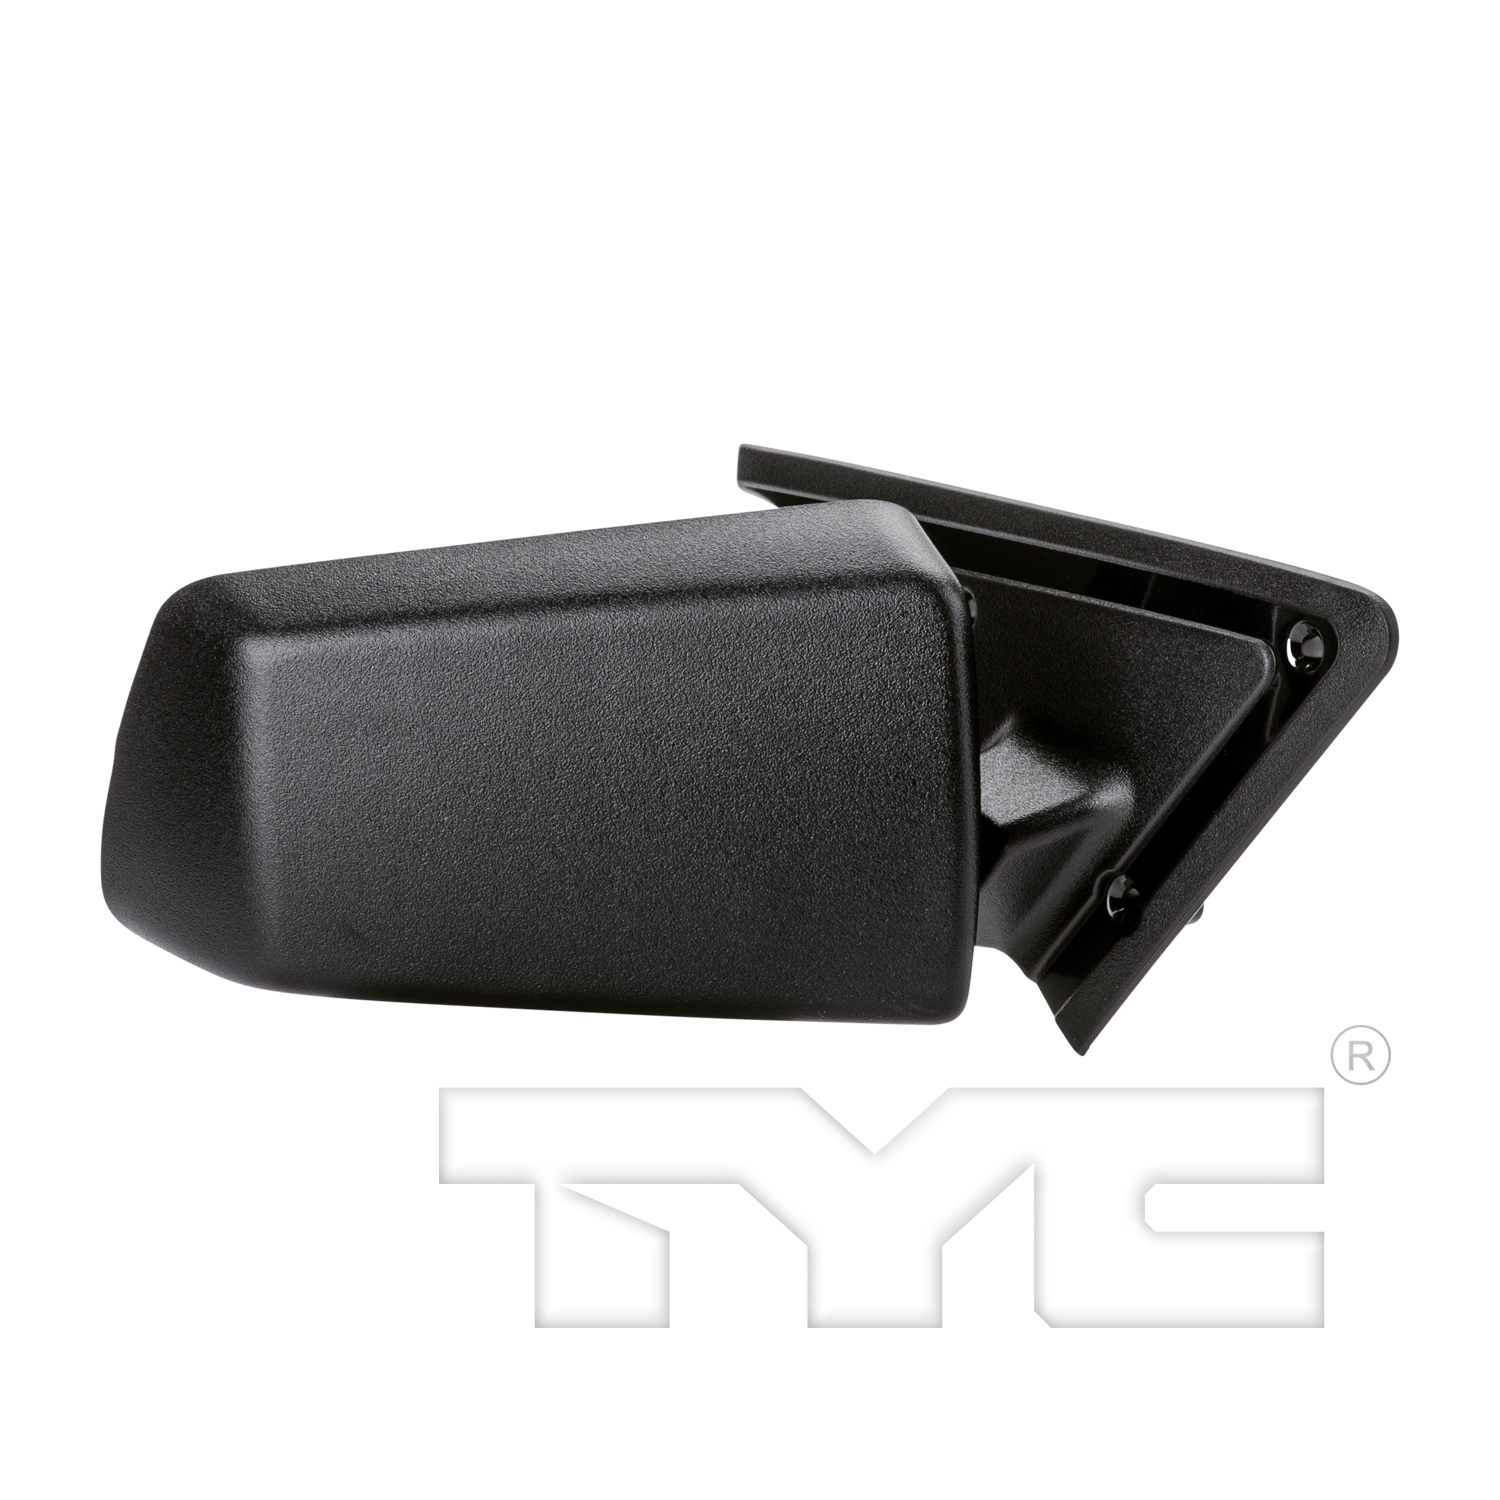 Aftermarket MIRRORS for CHEVROLET - S10 BLAZER, S10 BLAZER,85-94,RT Mirror outside rear view